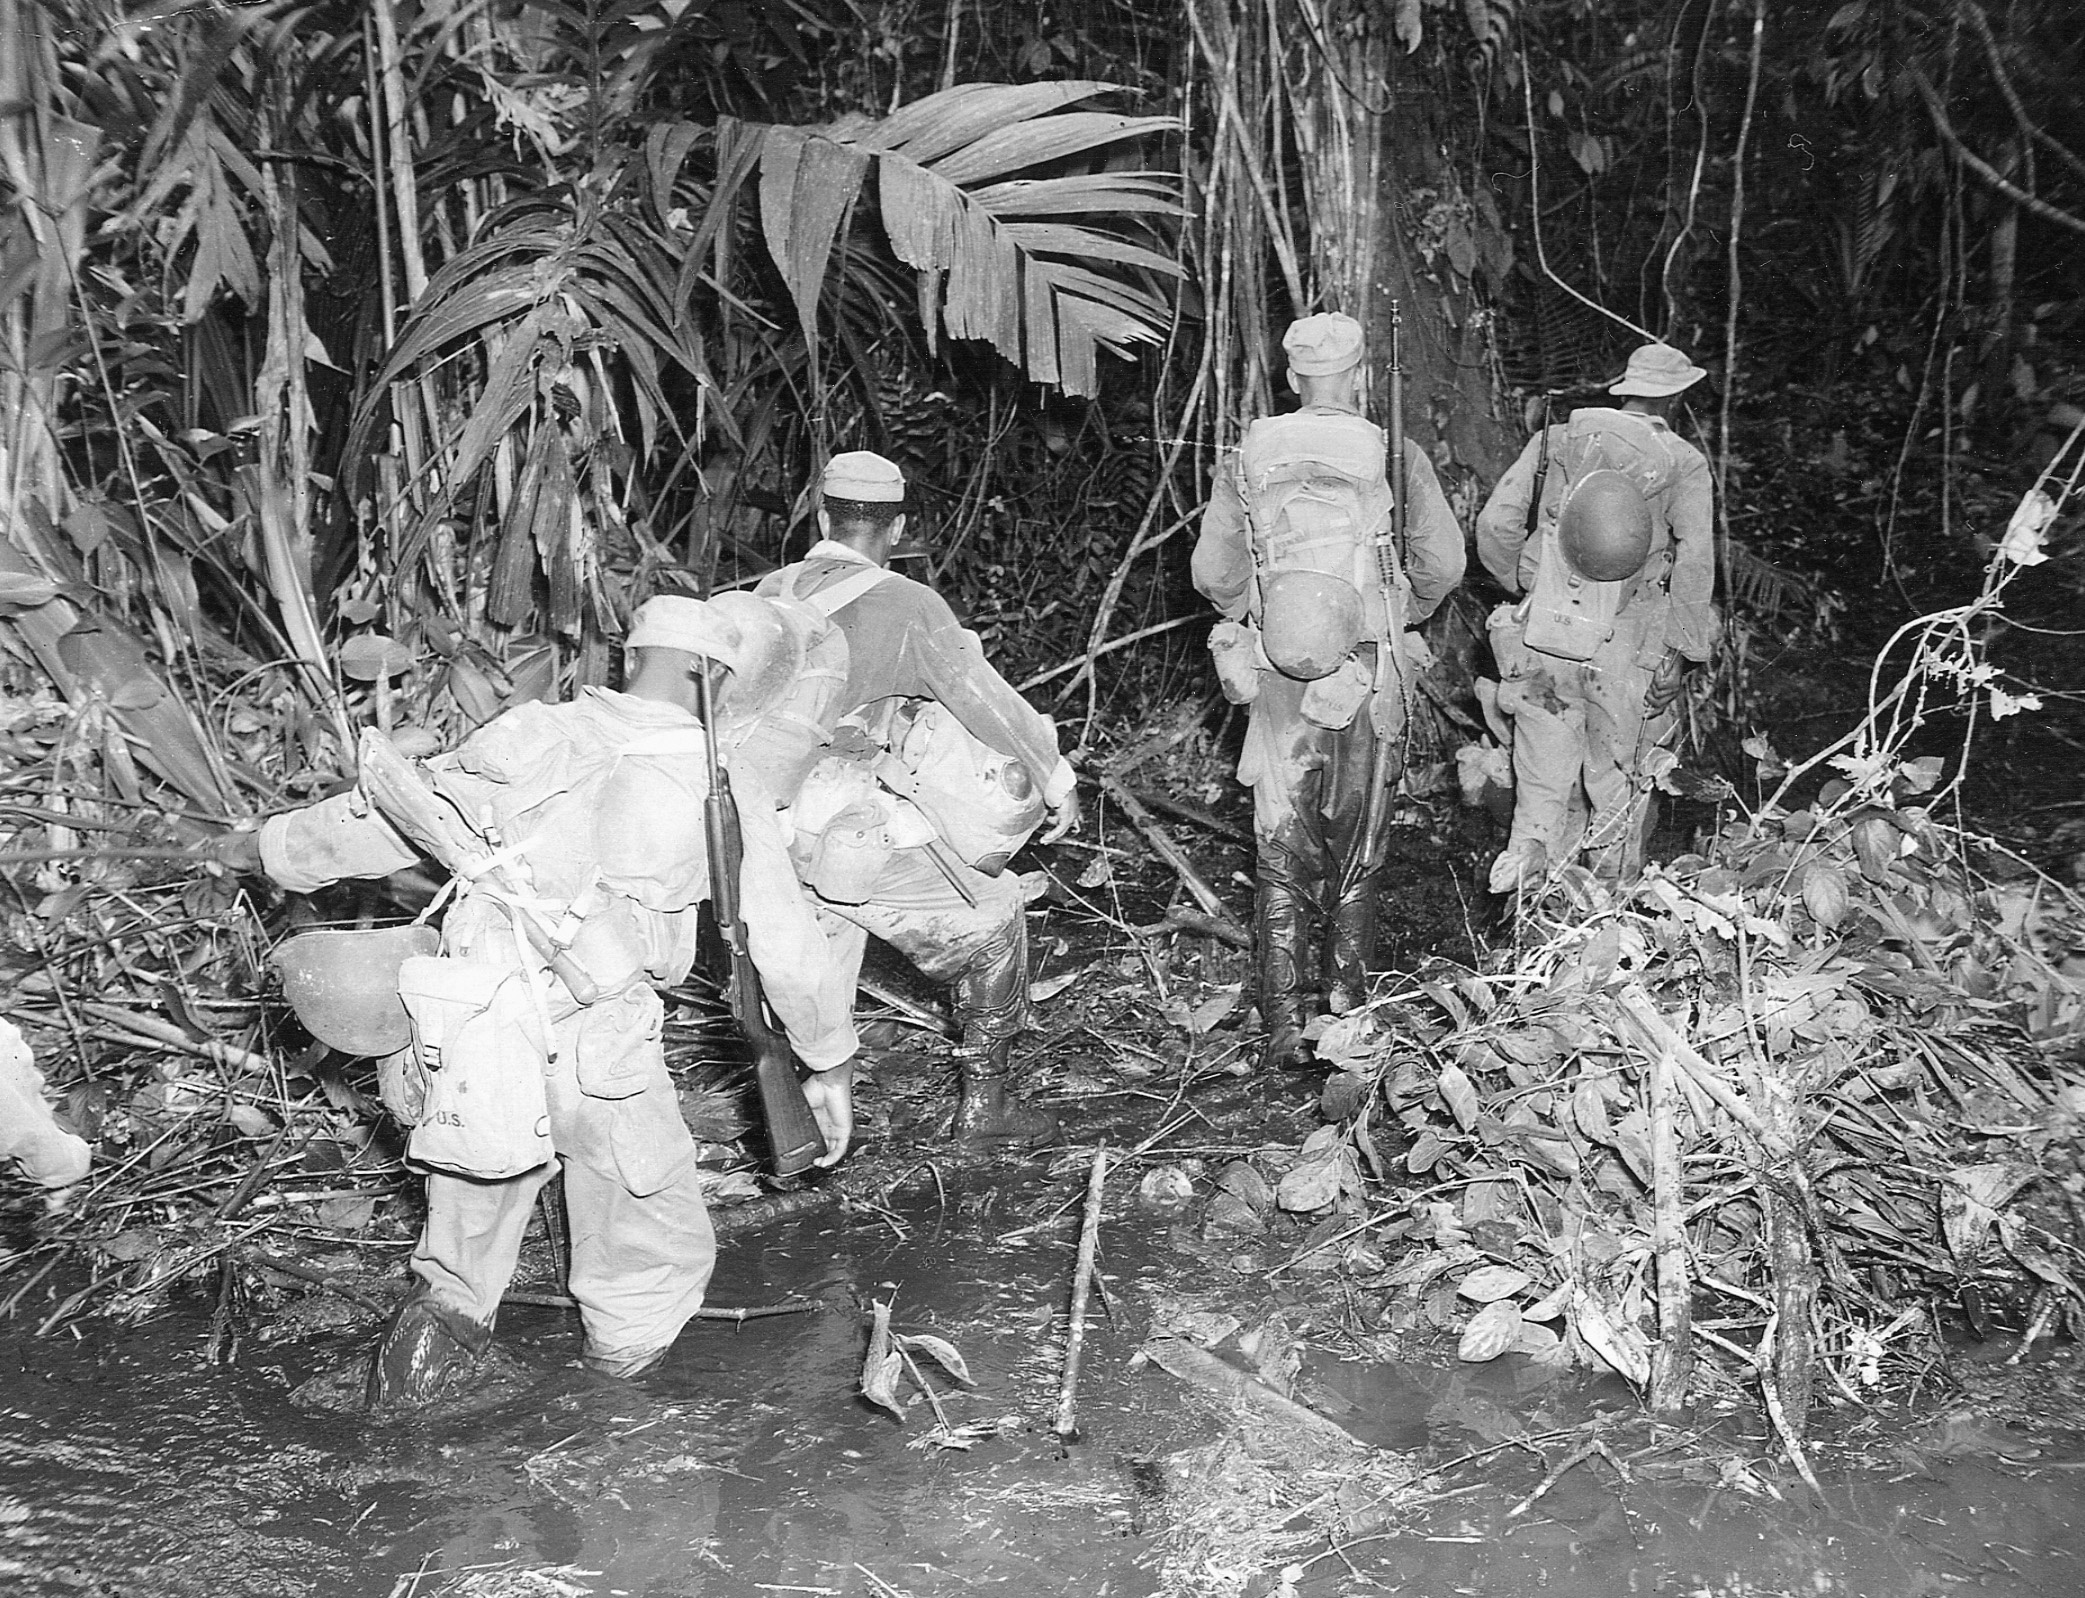 Laden with combat necessities, soldiers of the 93rd Infantry Division push through the dense jungle of the East West Trail at Bougainville.